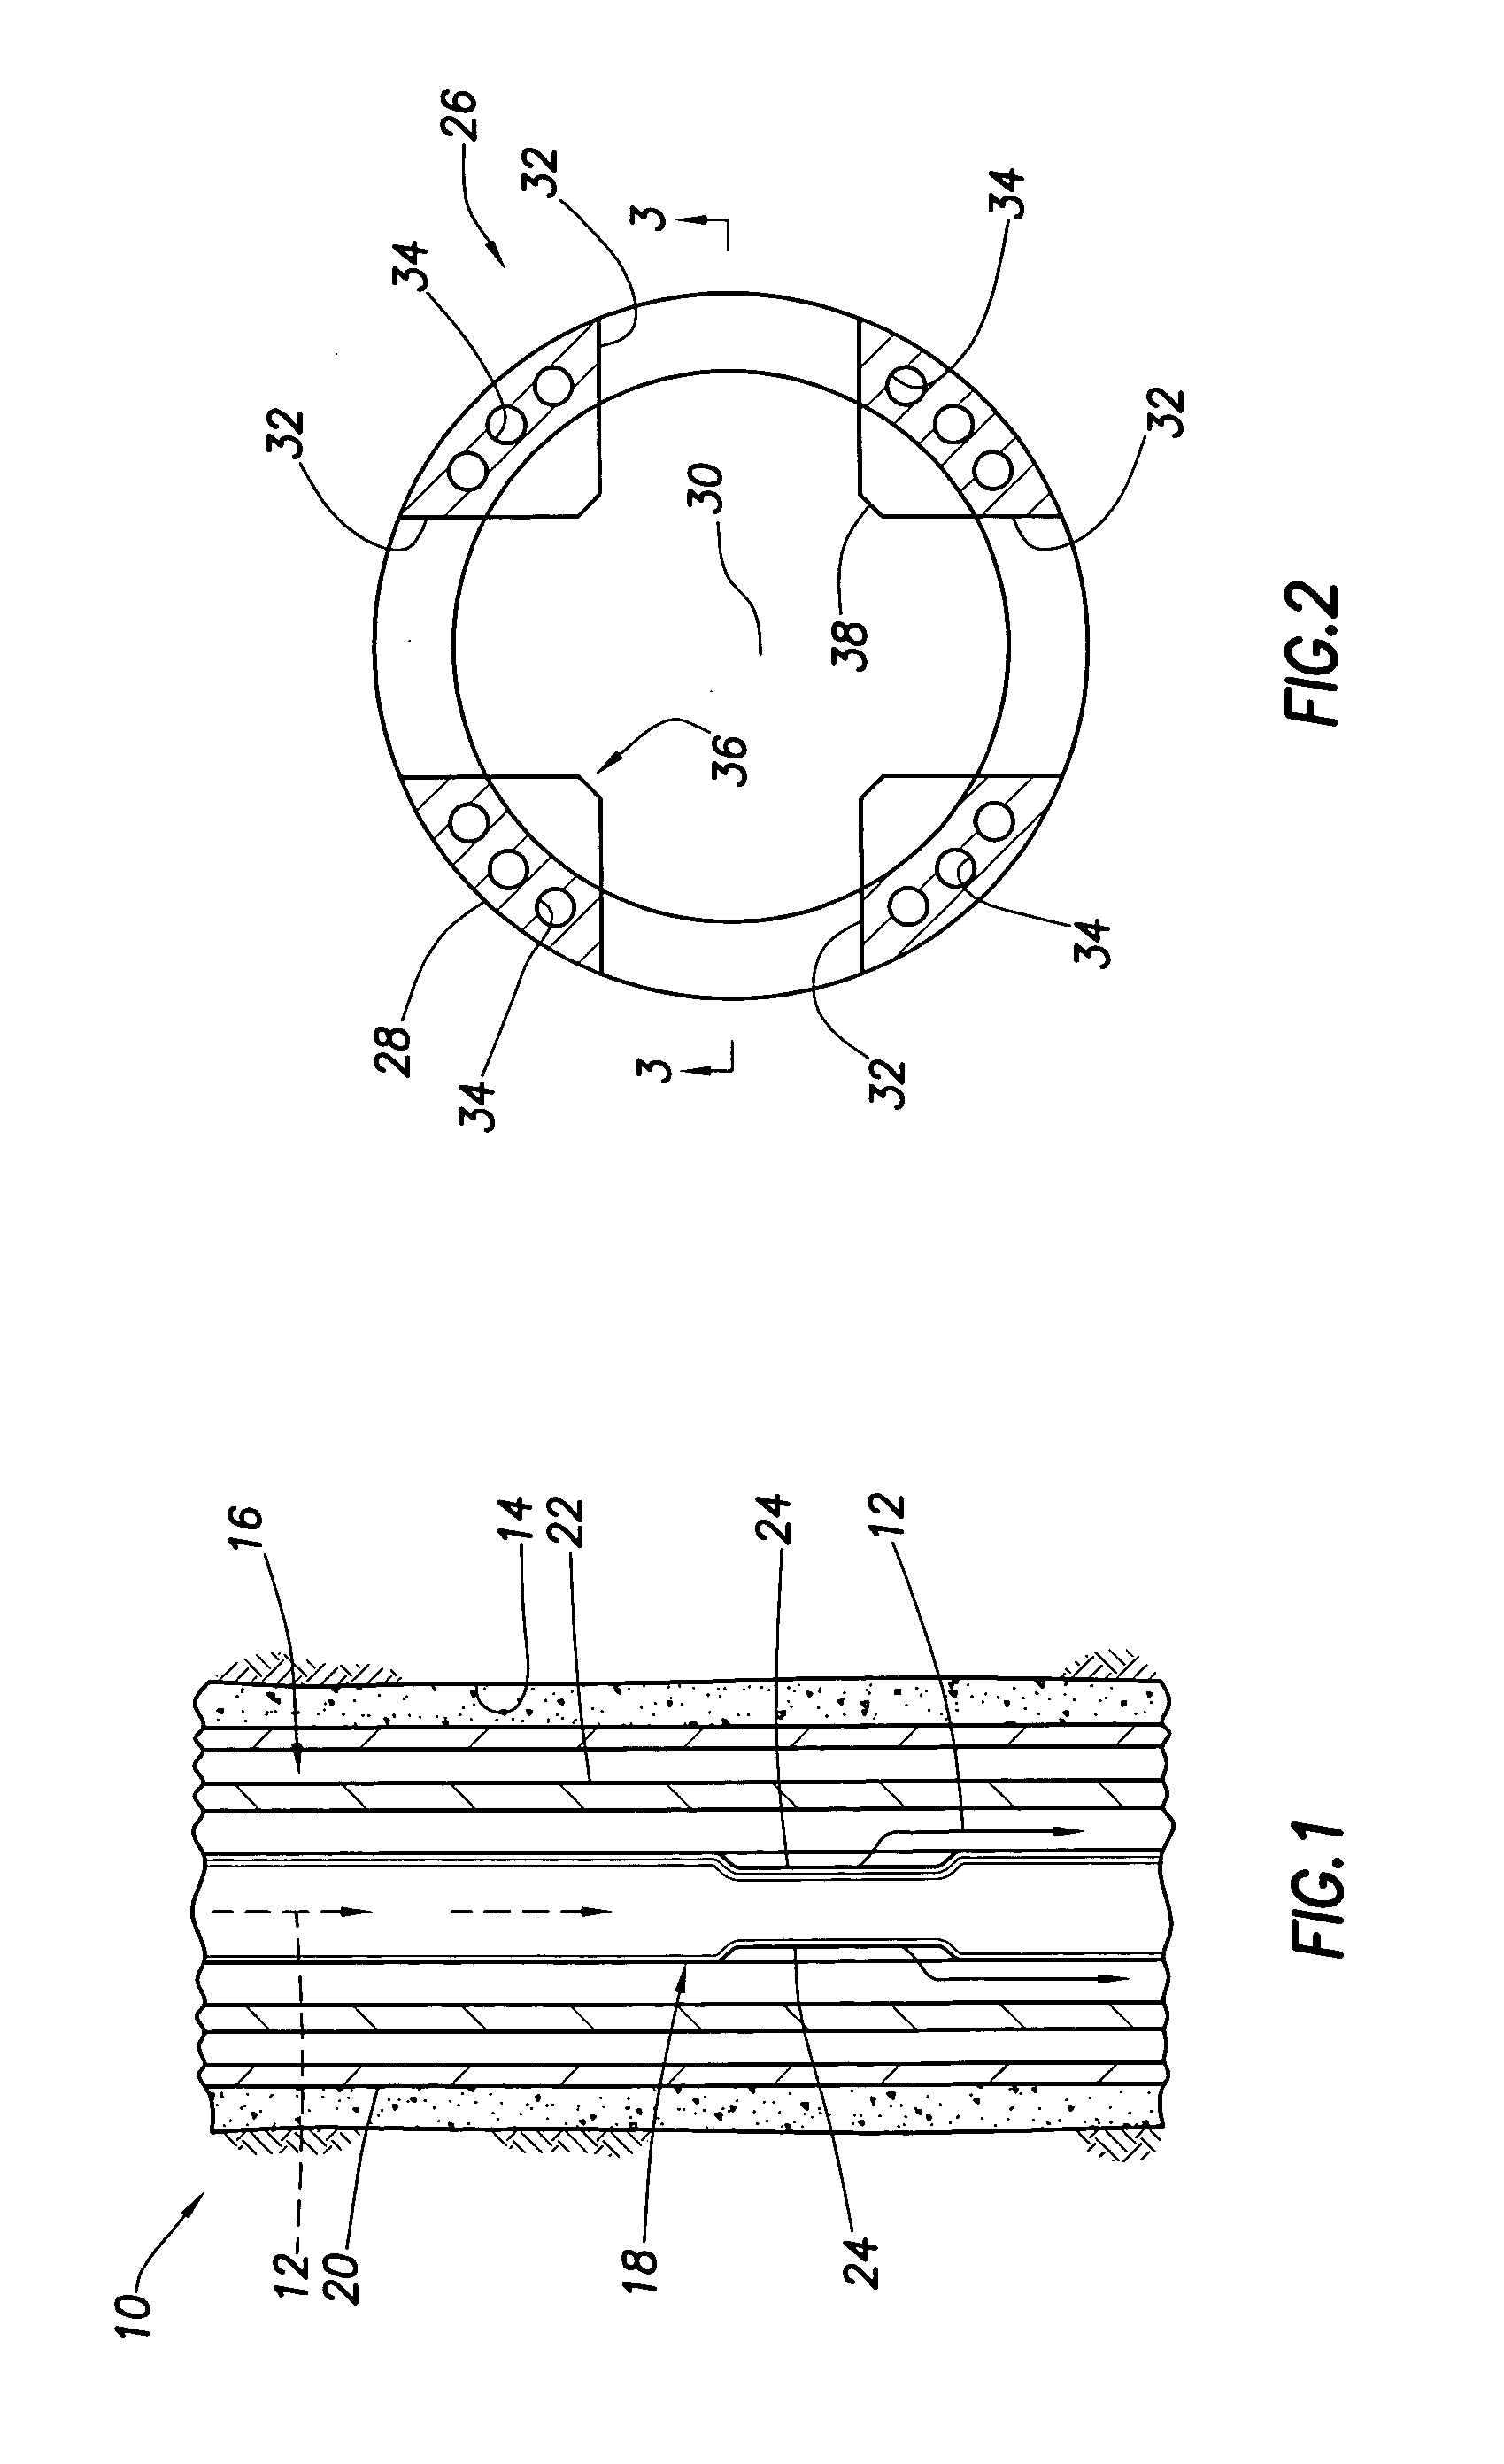 Erosion resistant crossover for fracturing/gravel packing